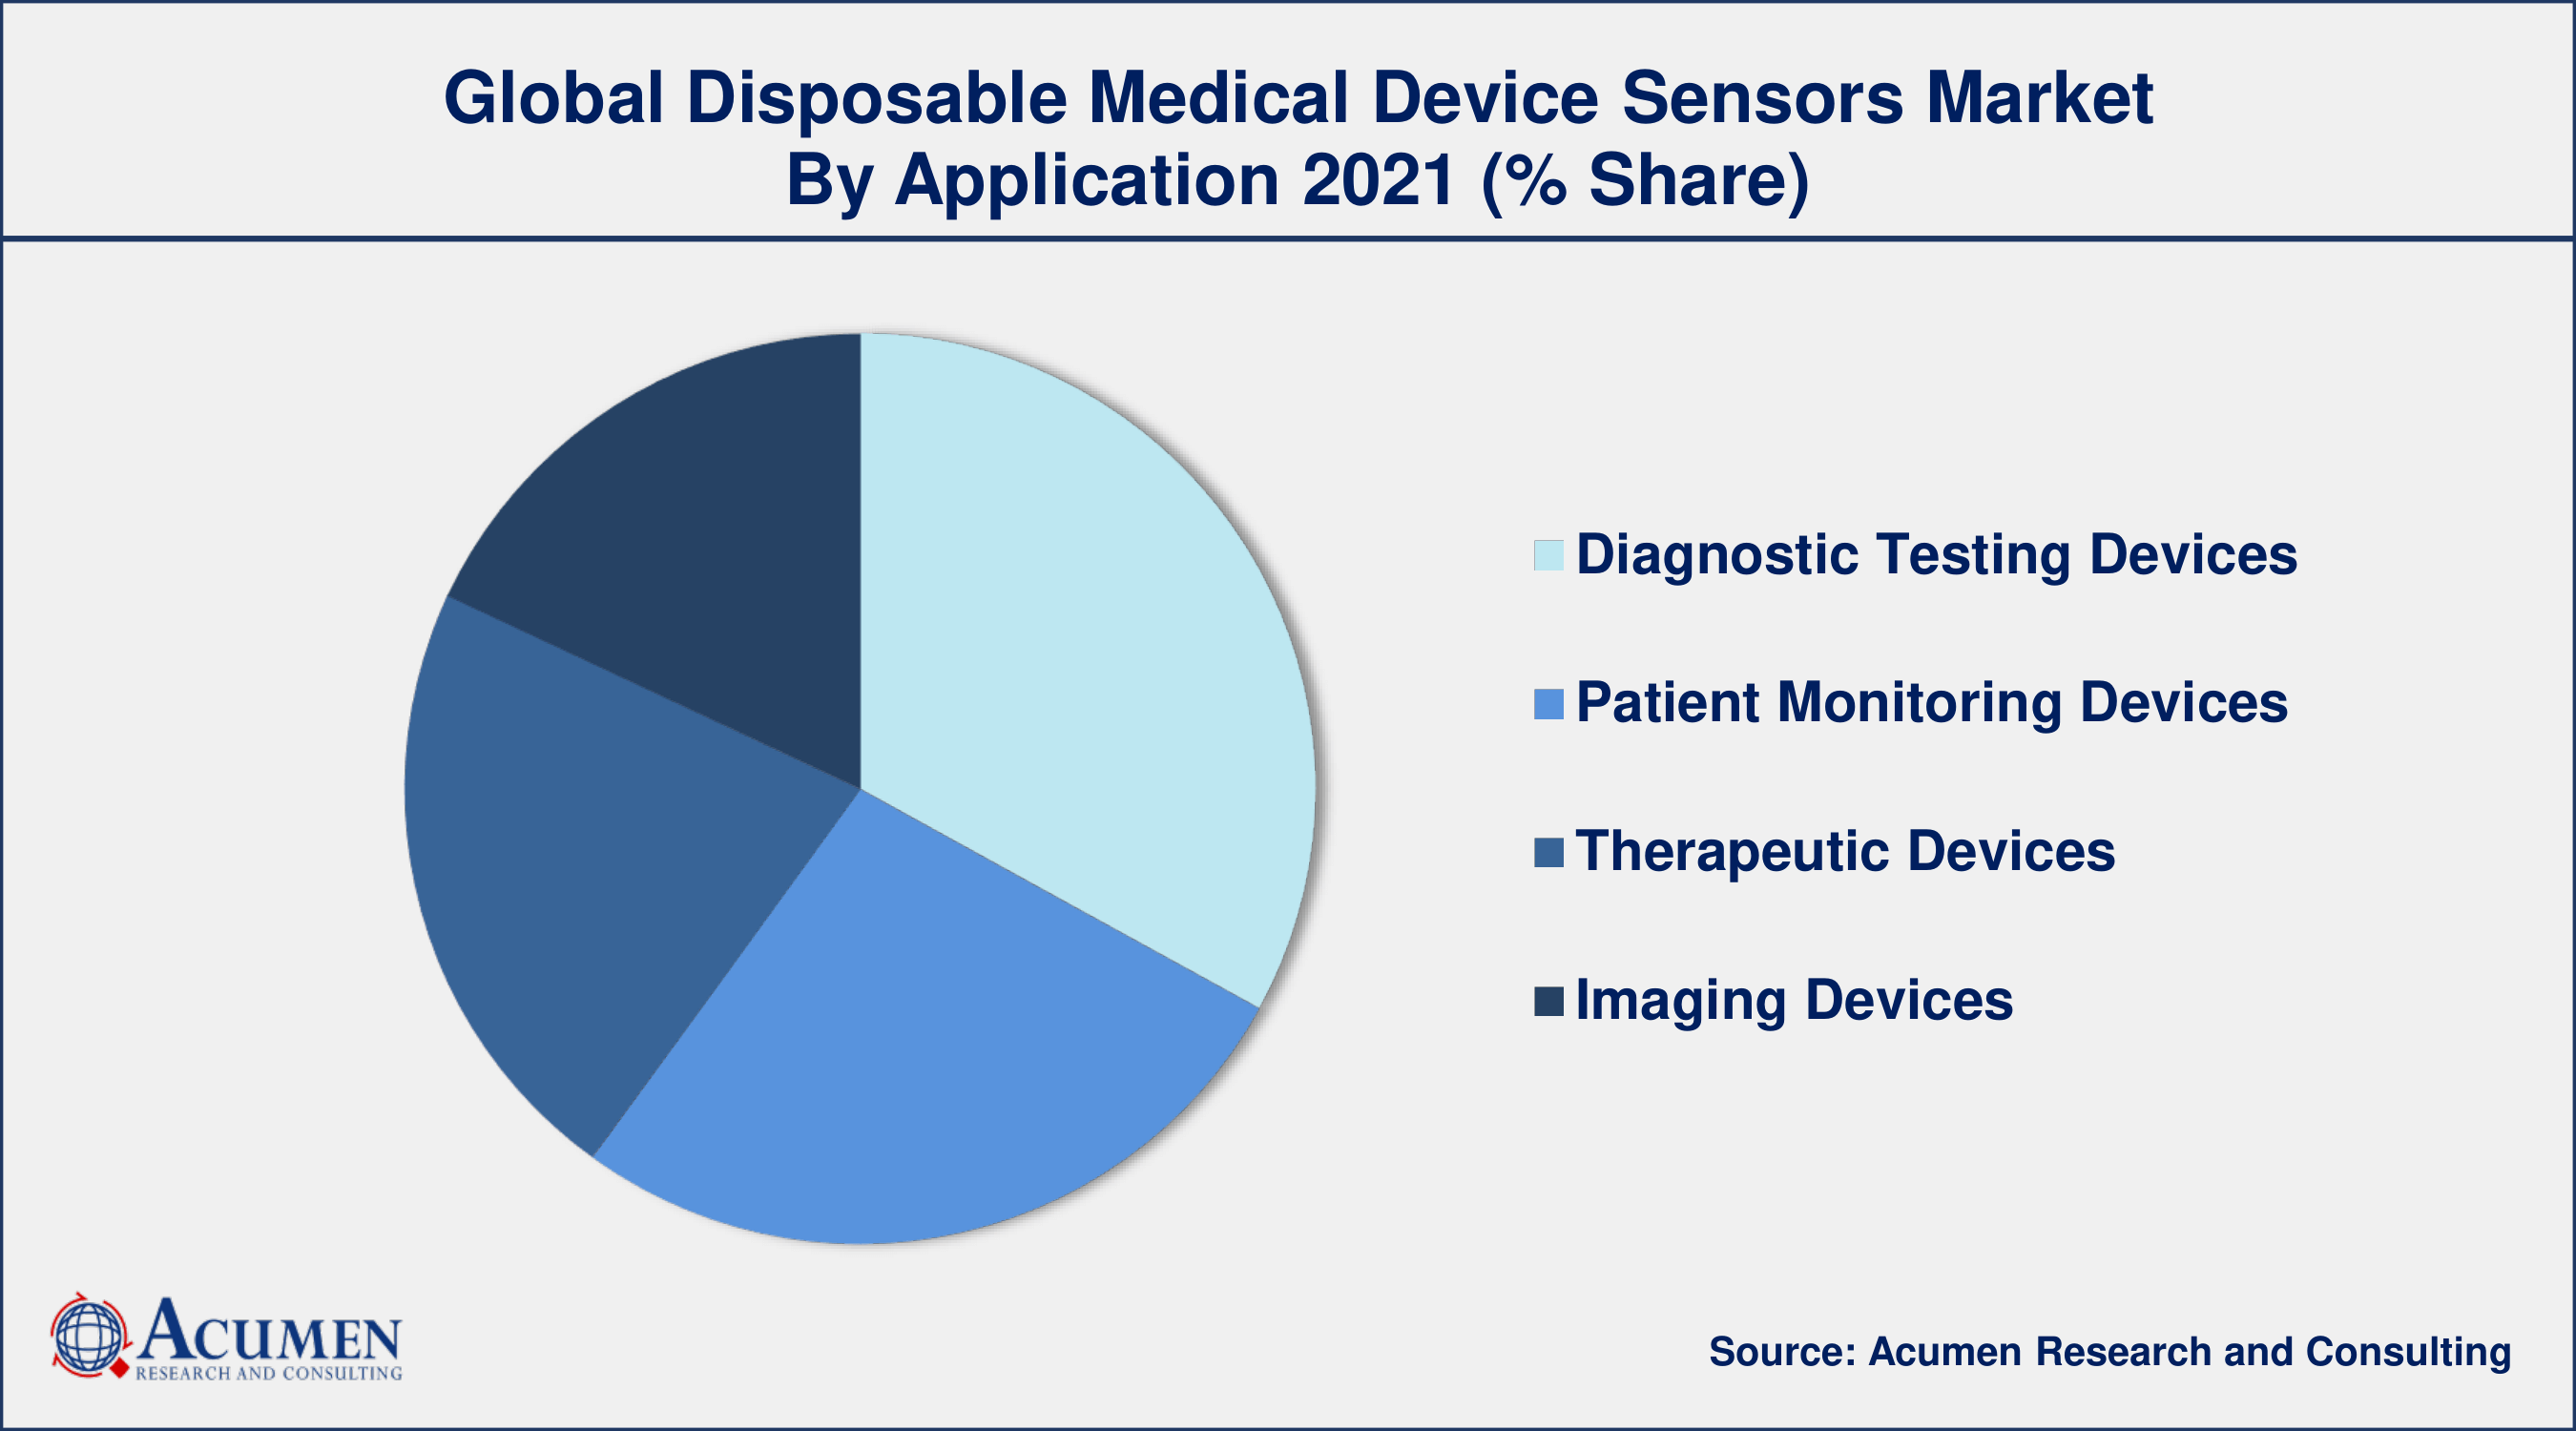 Among application, diagnostic testing devices segment engaged more than 33% of the total market share in 2021